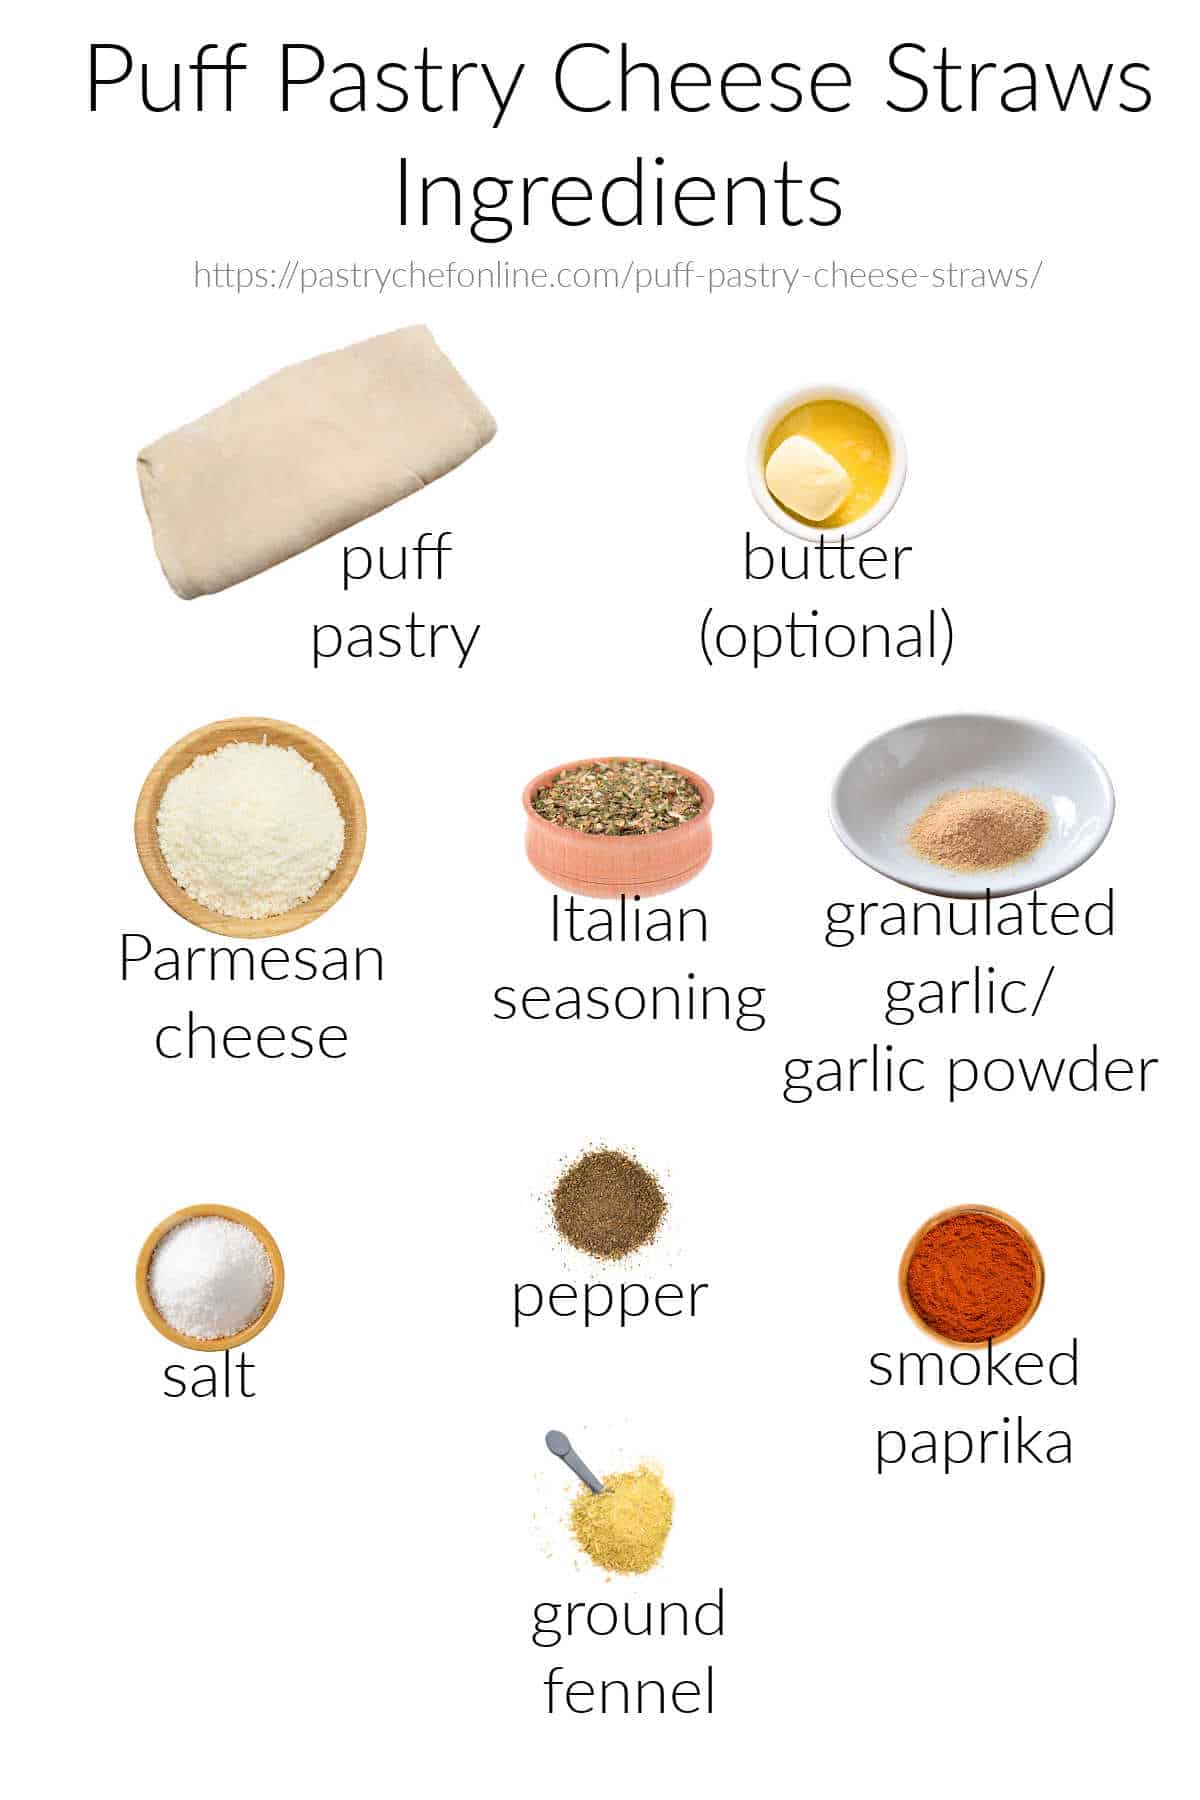 Images of all the ingredients needed to make cheese straws with puff pastry, labeled and on a white background.